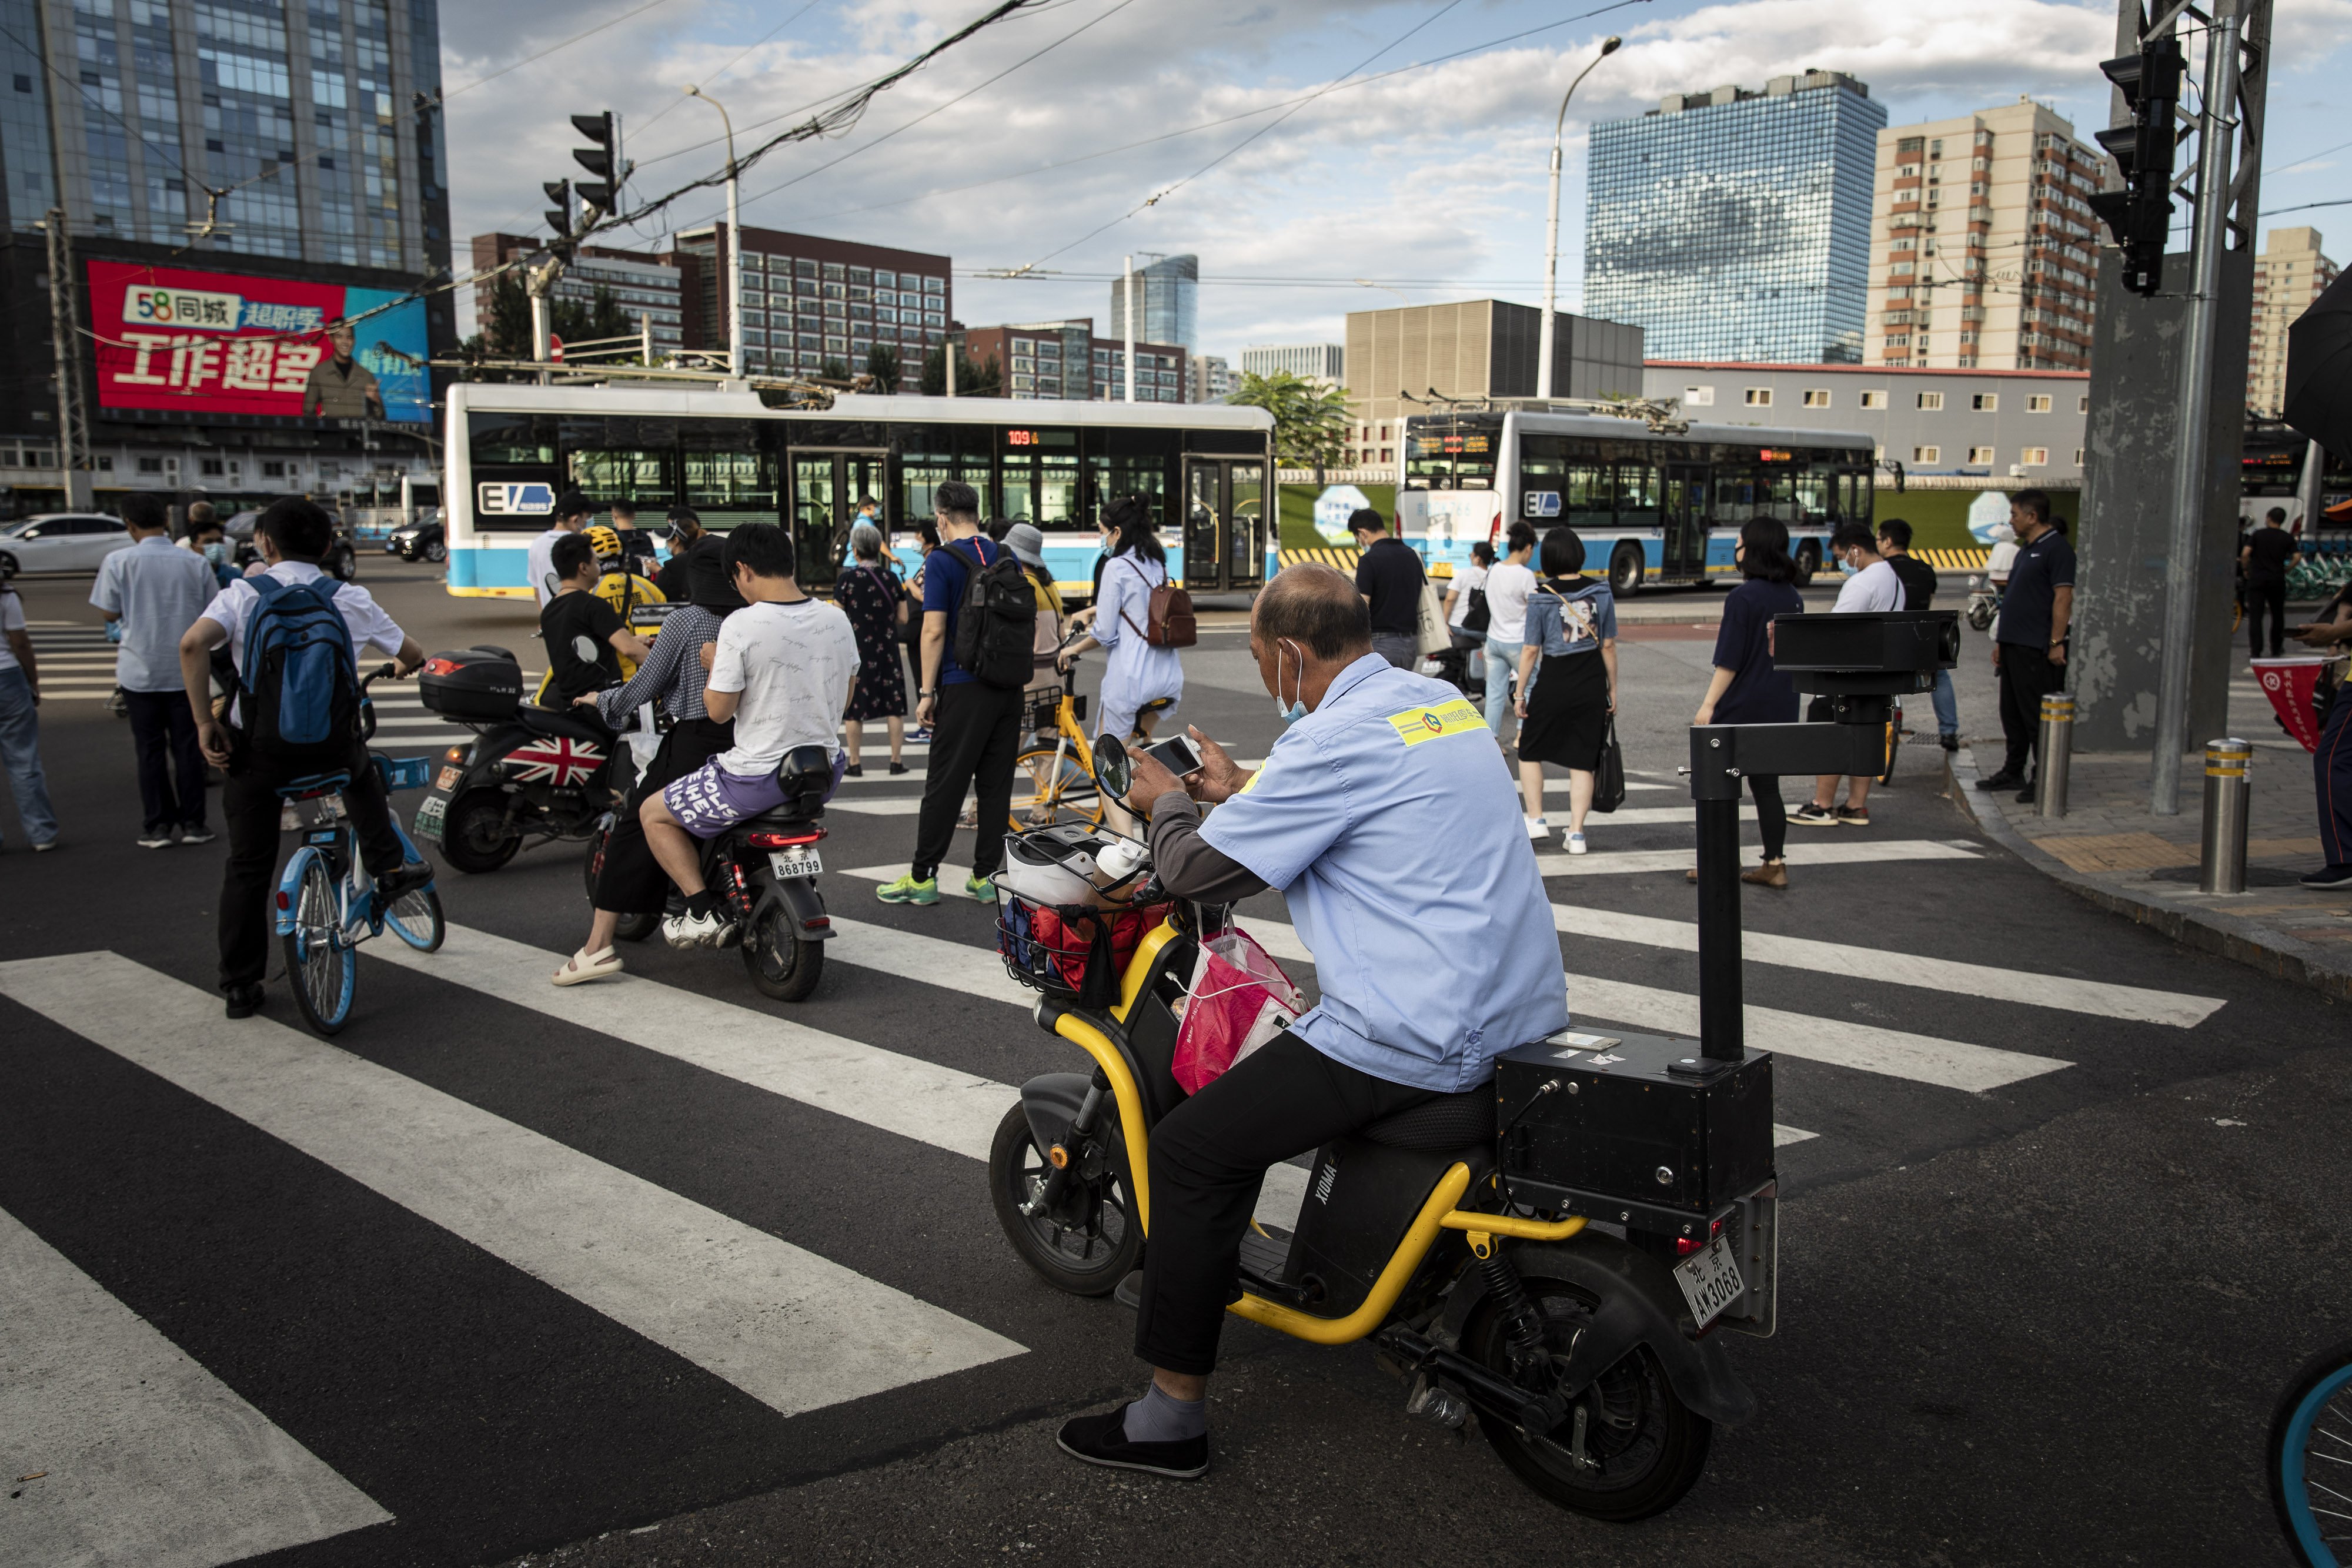 Commuters wait at a traffic intersection in Beijing on August 25. China has vowed to promote the welfare of all people and redistribute income, underscoring its push to achieve “common prosperity” in the country. Photo: Bloomberg